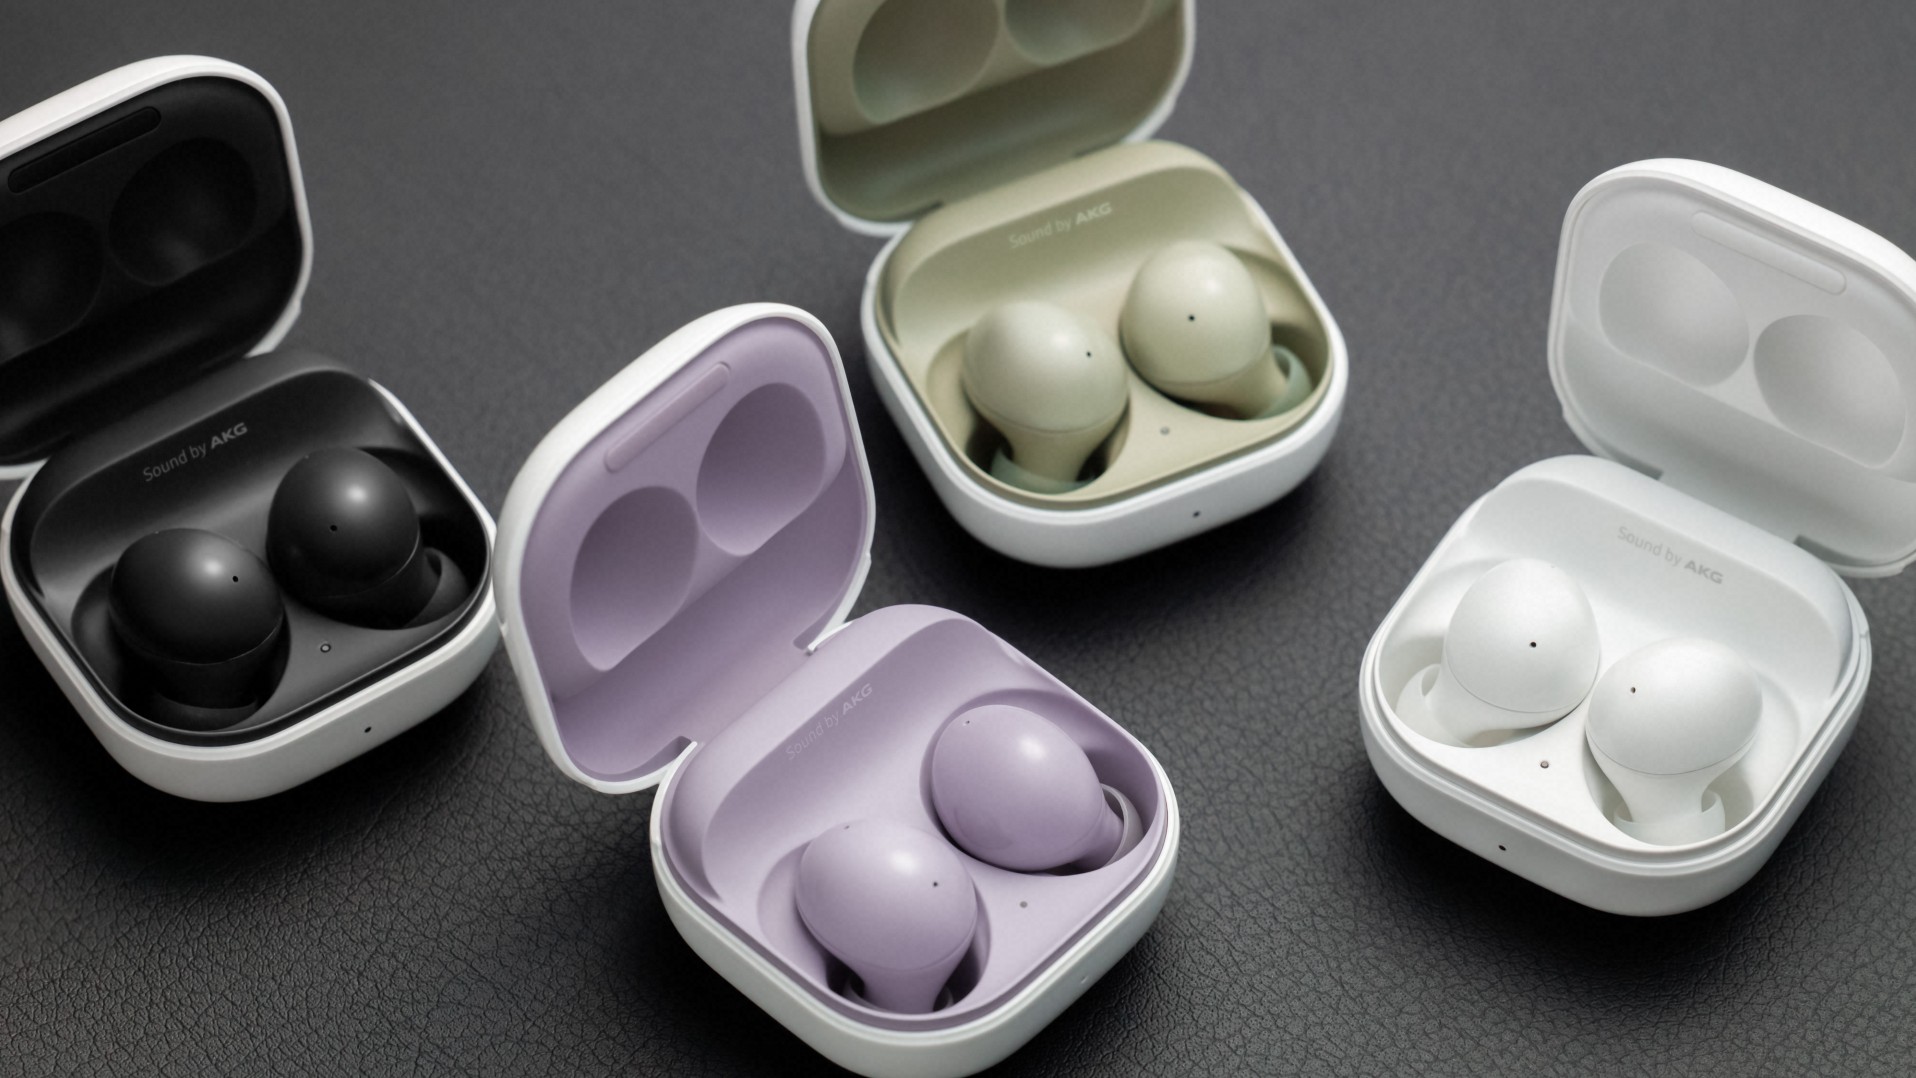 Samsung Galaxy Buds 3 release date rumours, potential price, features